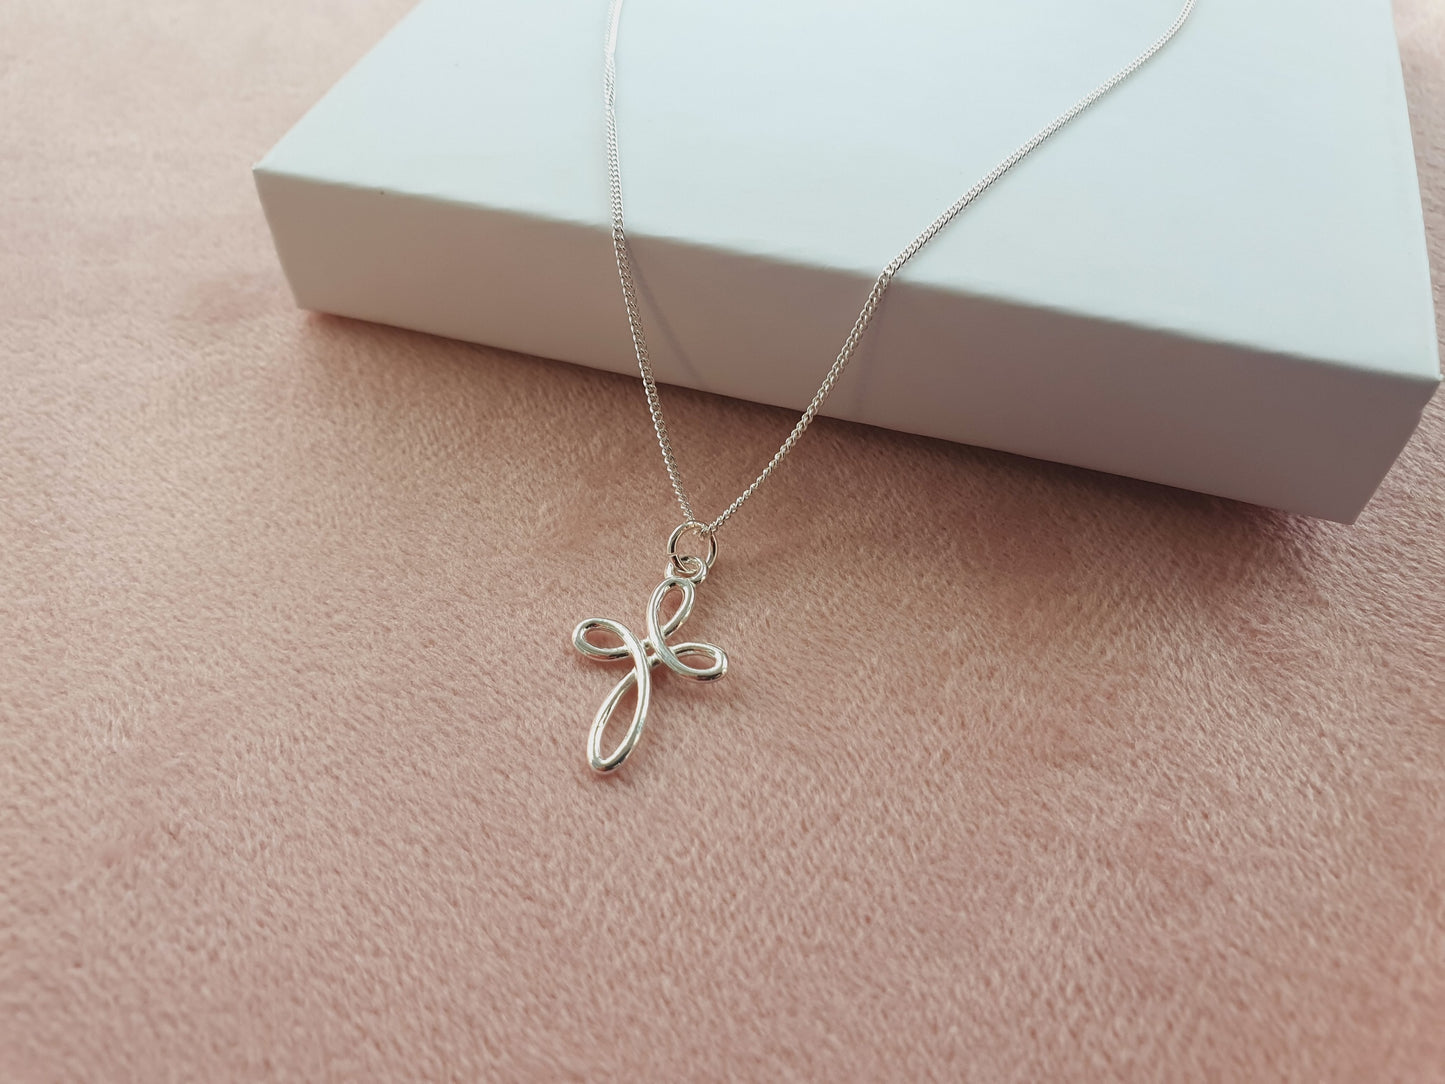 First Holy Communion Eternity Cross Necklace in Sterling Silver 925, Personalised Keepsake Gift